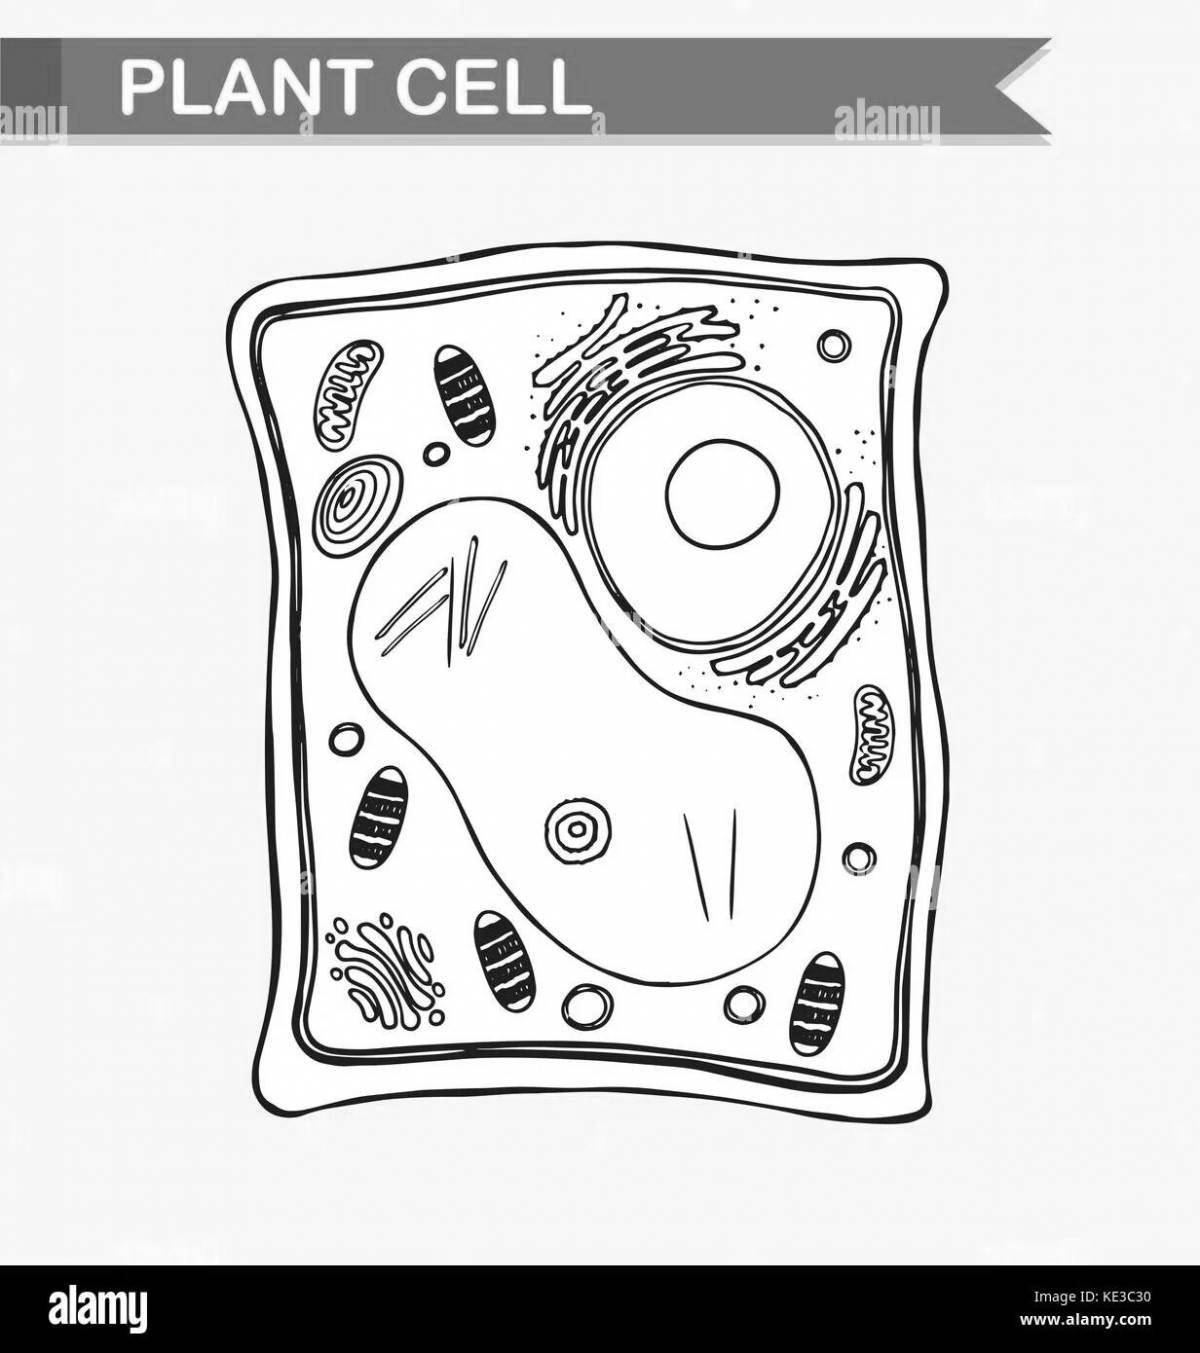 Coloring book bright structure of plant cells